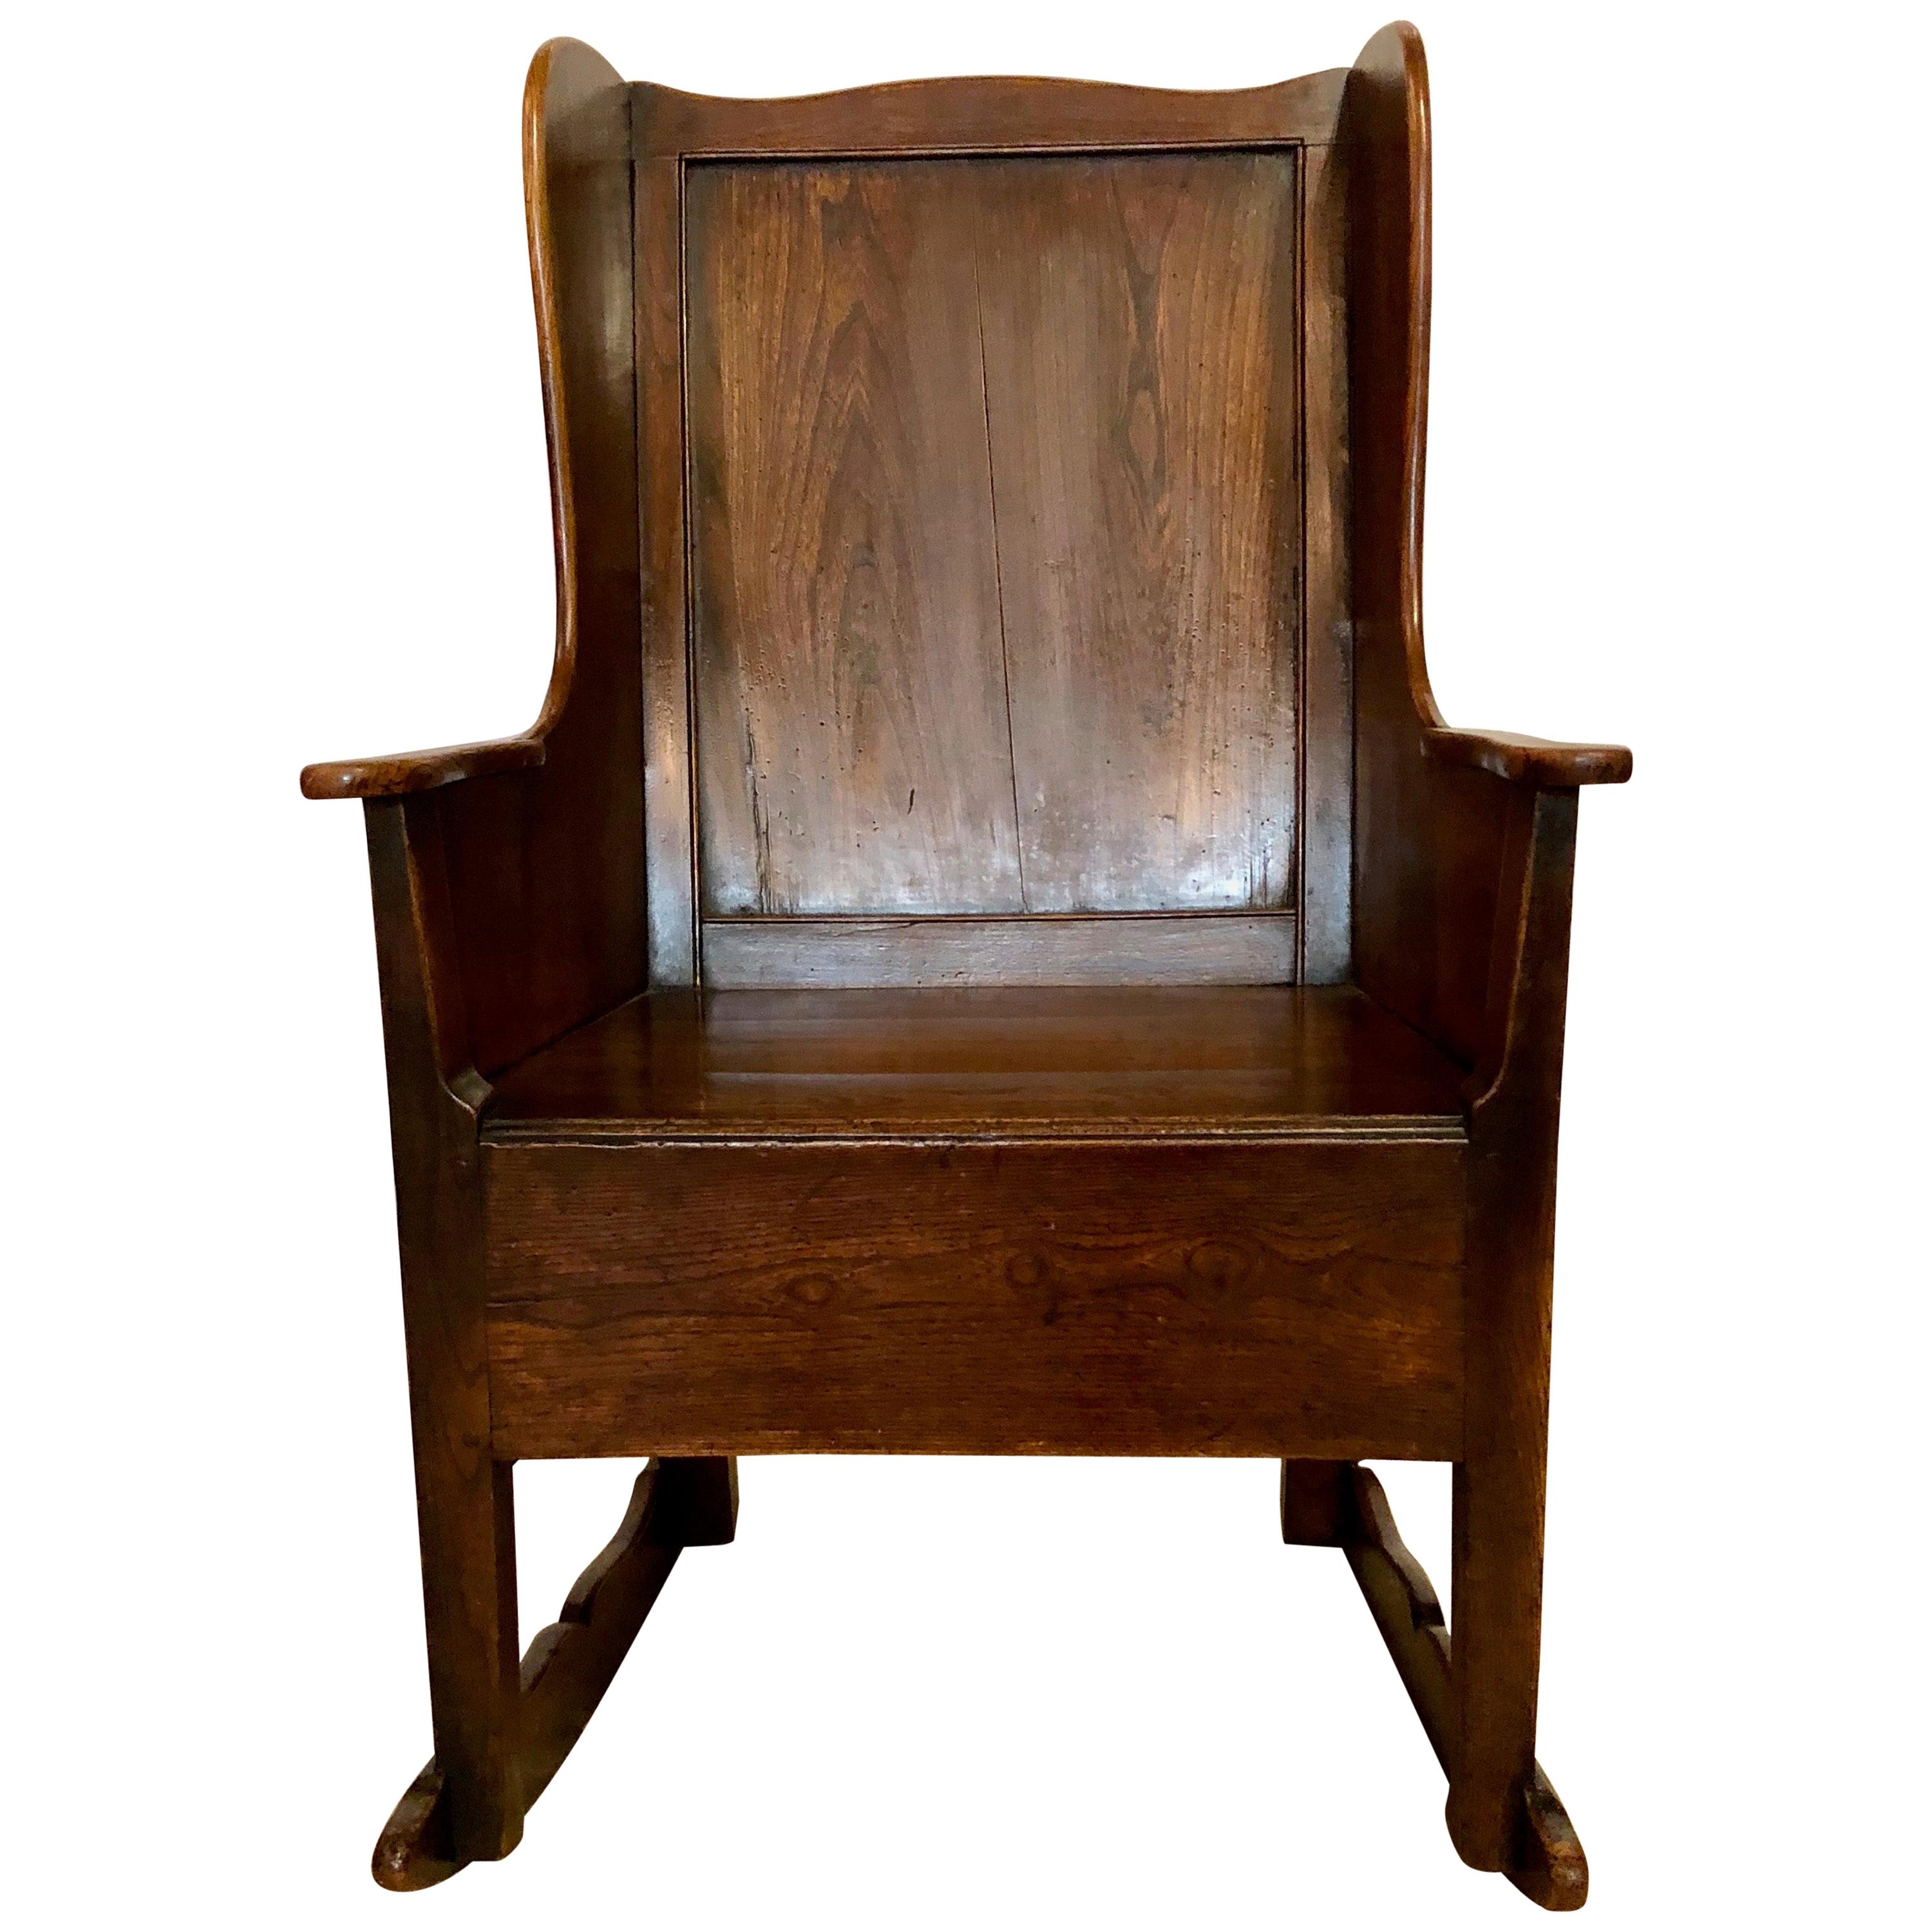 Antique George III Provincial Rocking Wing Chair, circa 1800-1810